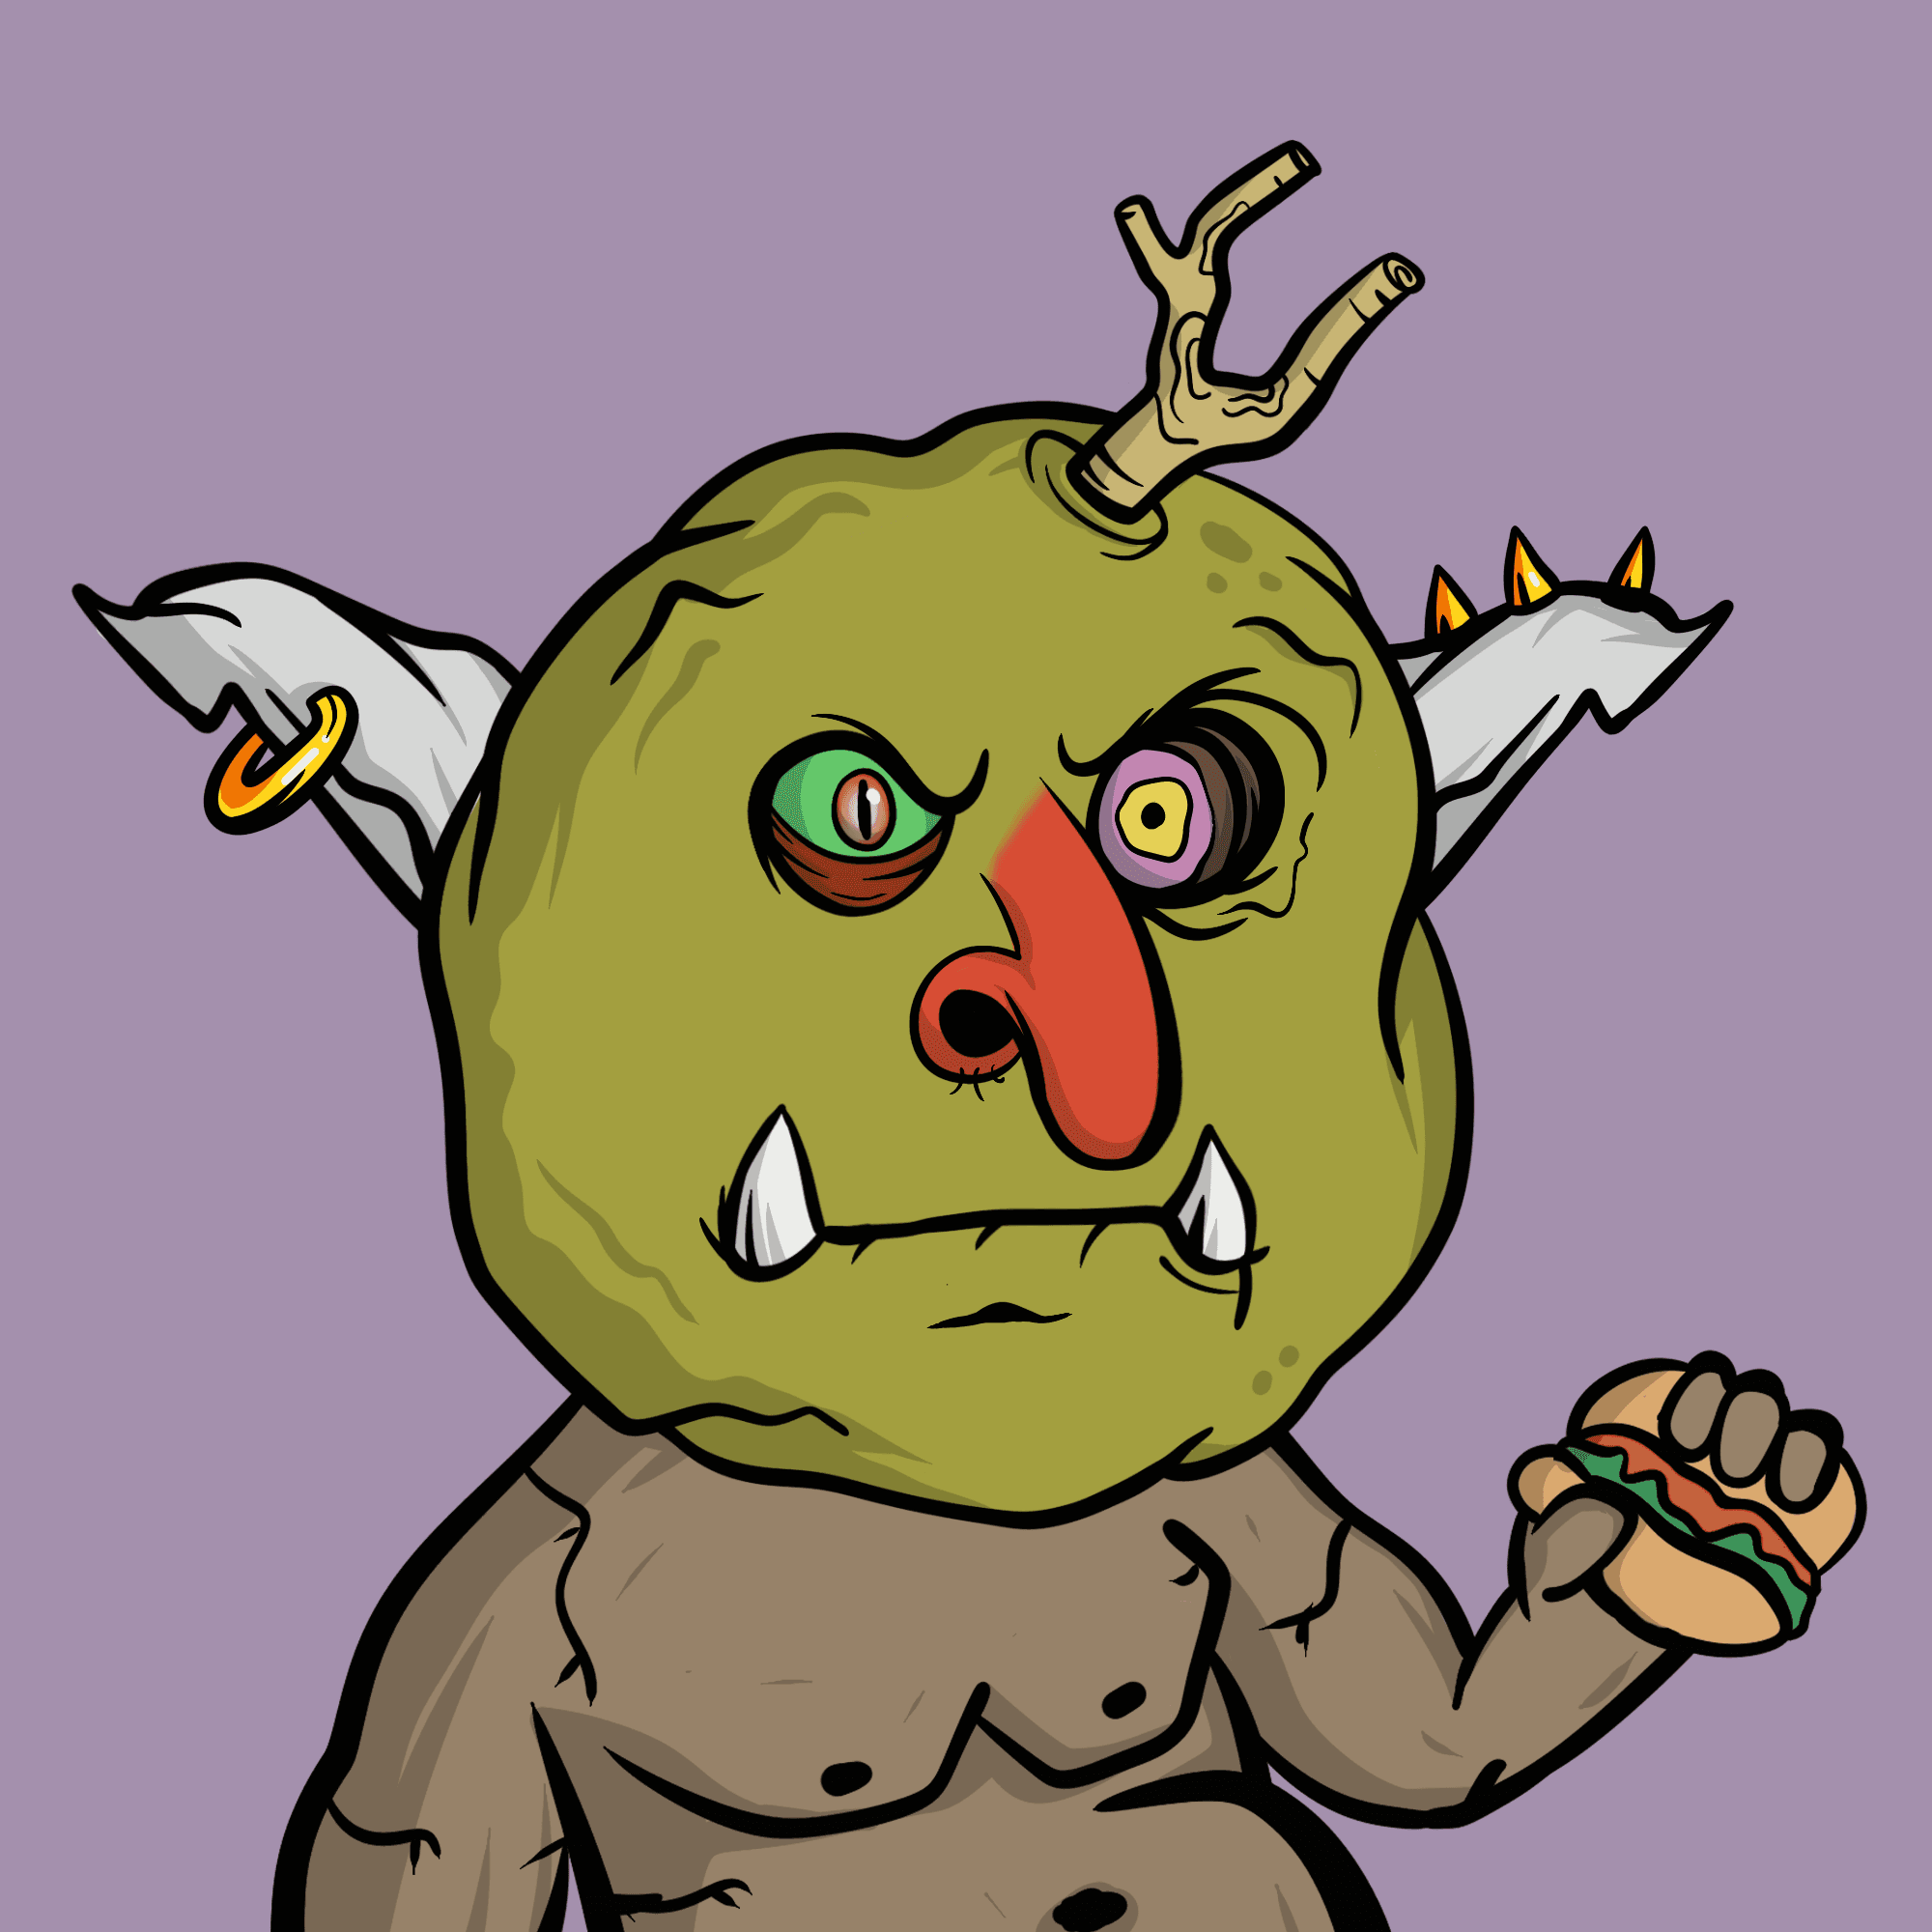 orcswtf #78